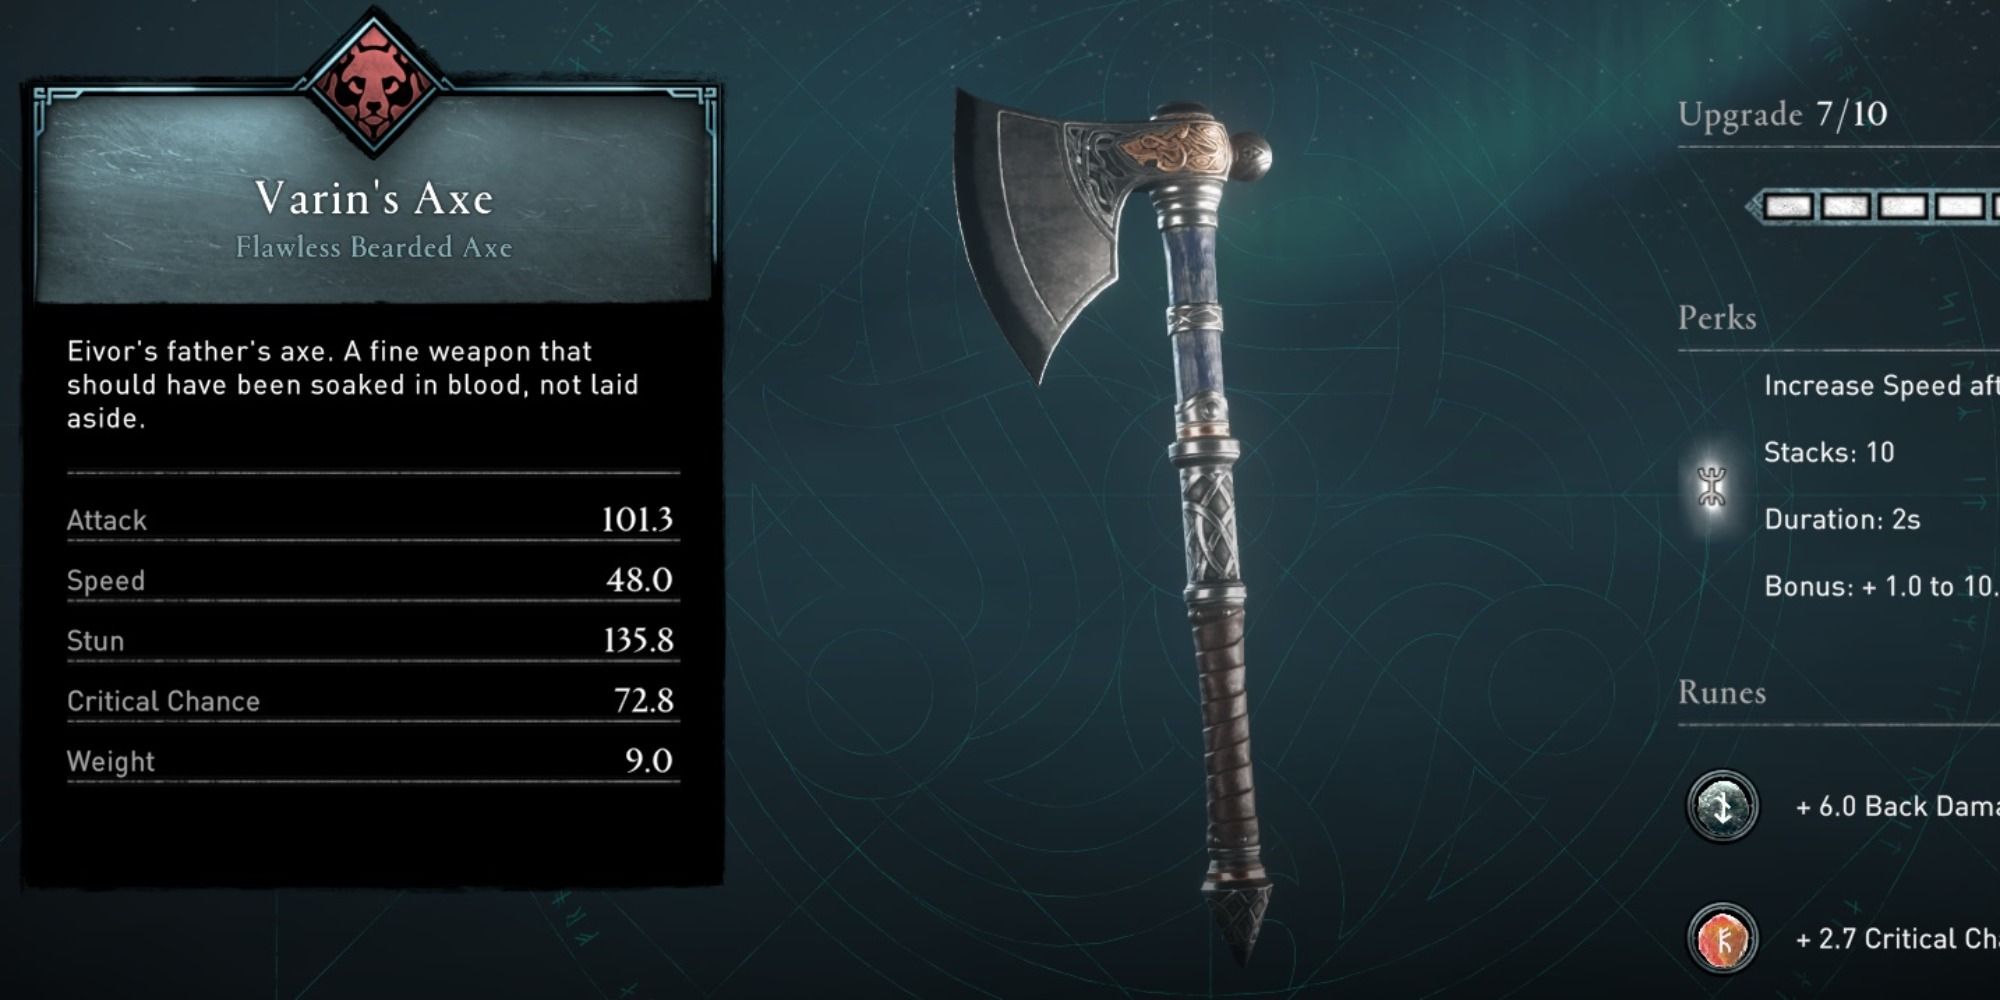 An image of Varin's Axe and its stats in Assassin's Creed: Valhalla